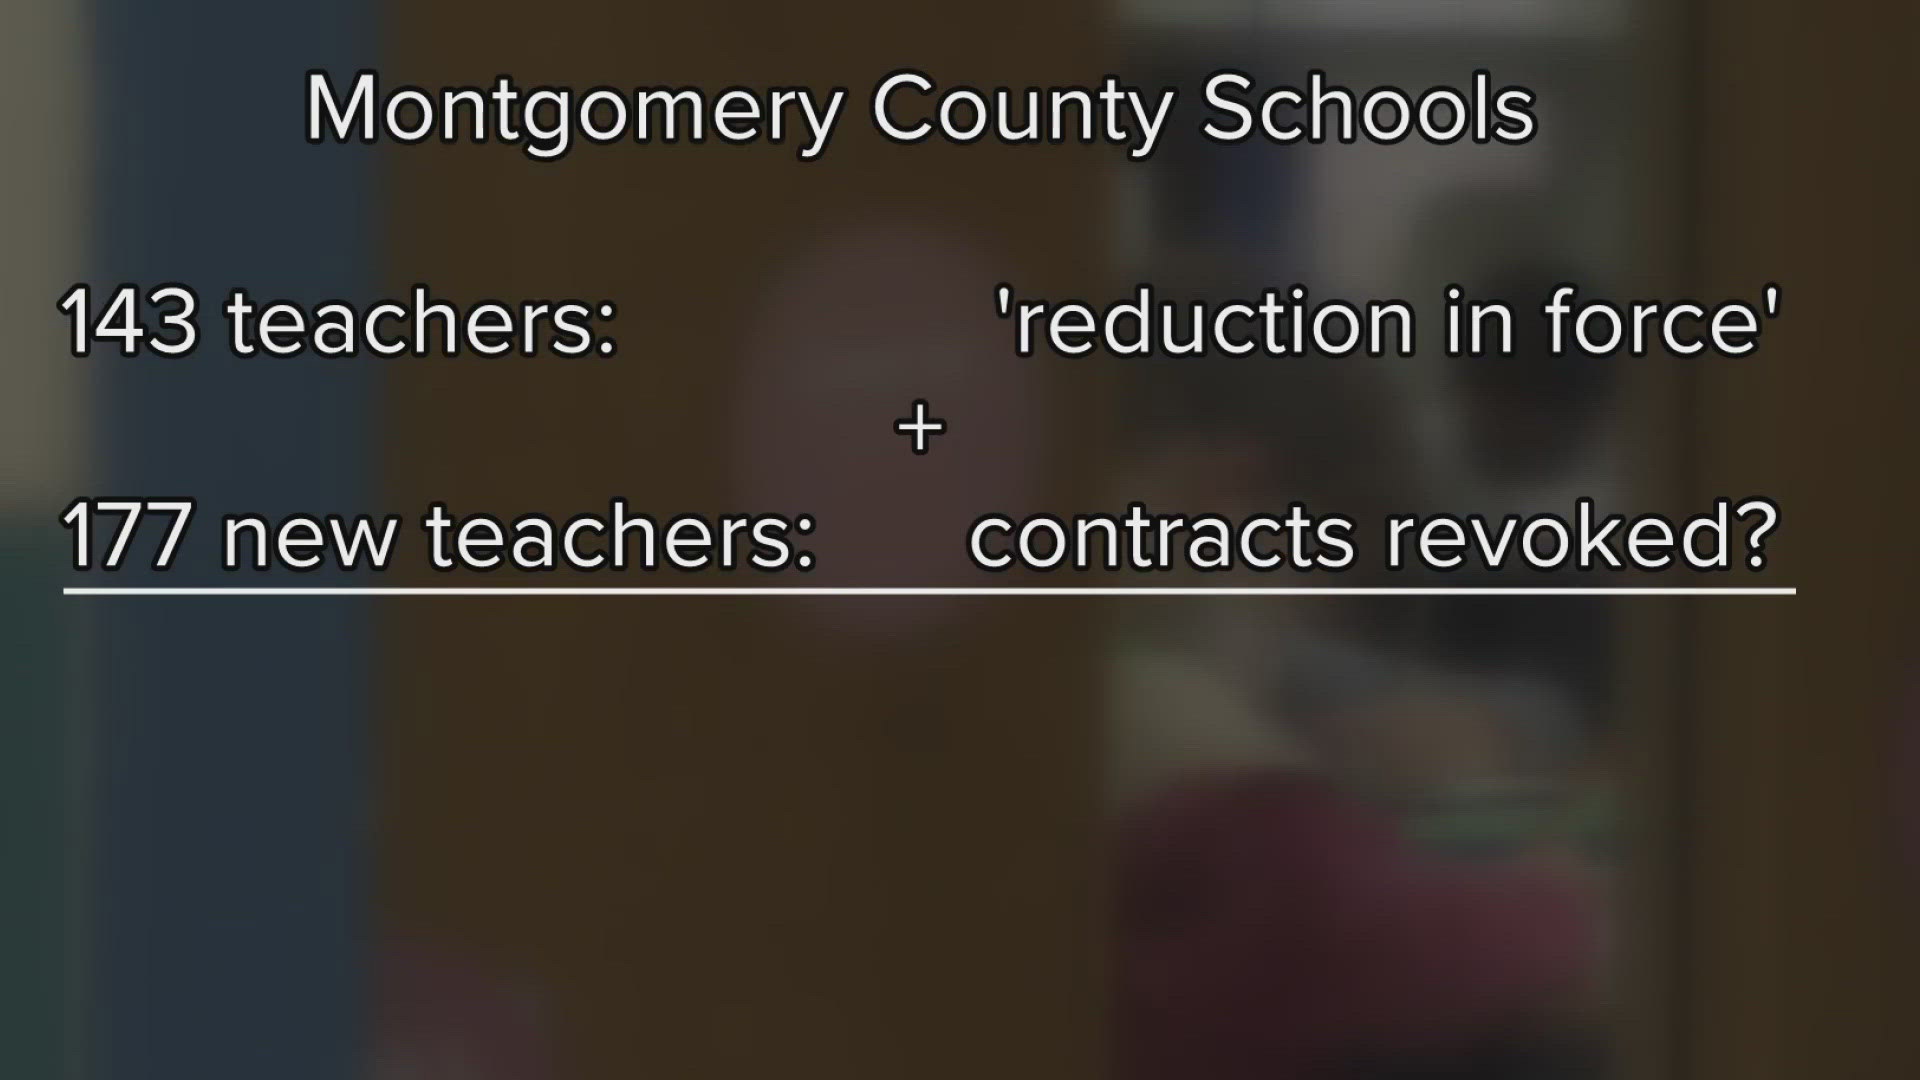 Just before the County Council took a final vote on a budget, the school system warned that they would have to cut 320 teacher jobs.